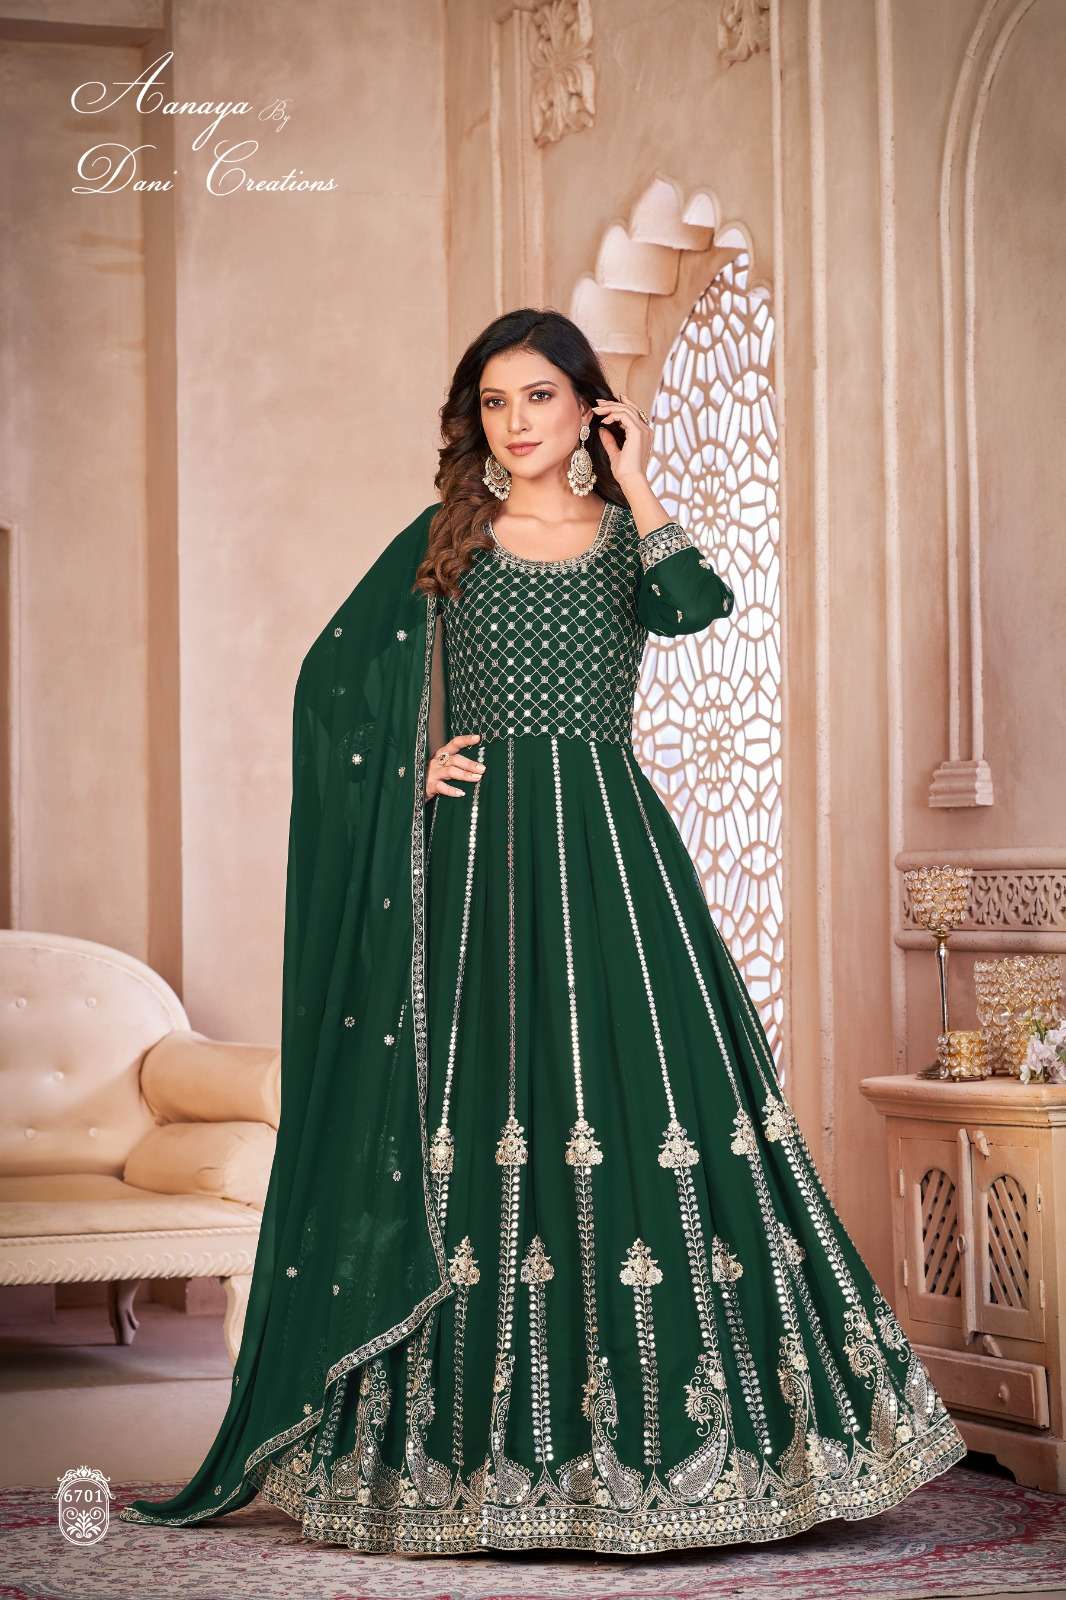 aanya by dani creation aanya vol 167 series 6701 to 6702 faux georgette heavy embroidery gown style dress gown style partywear suit  